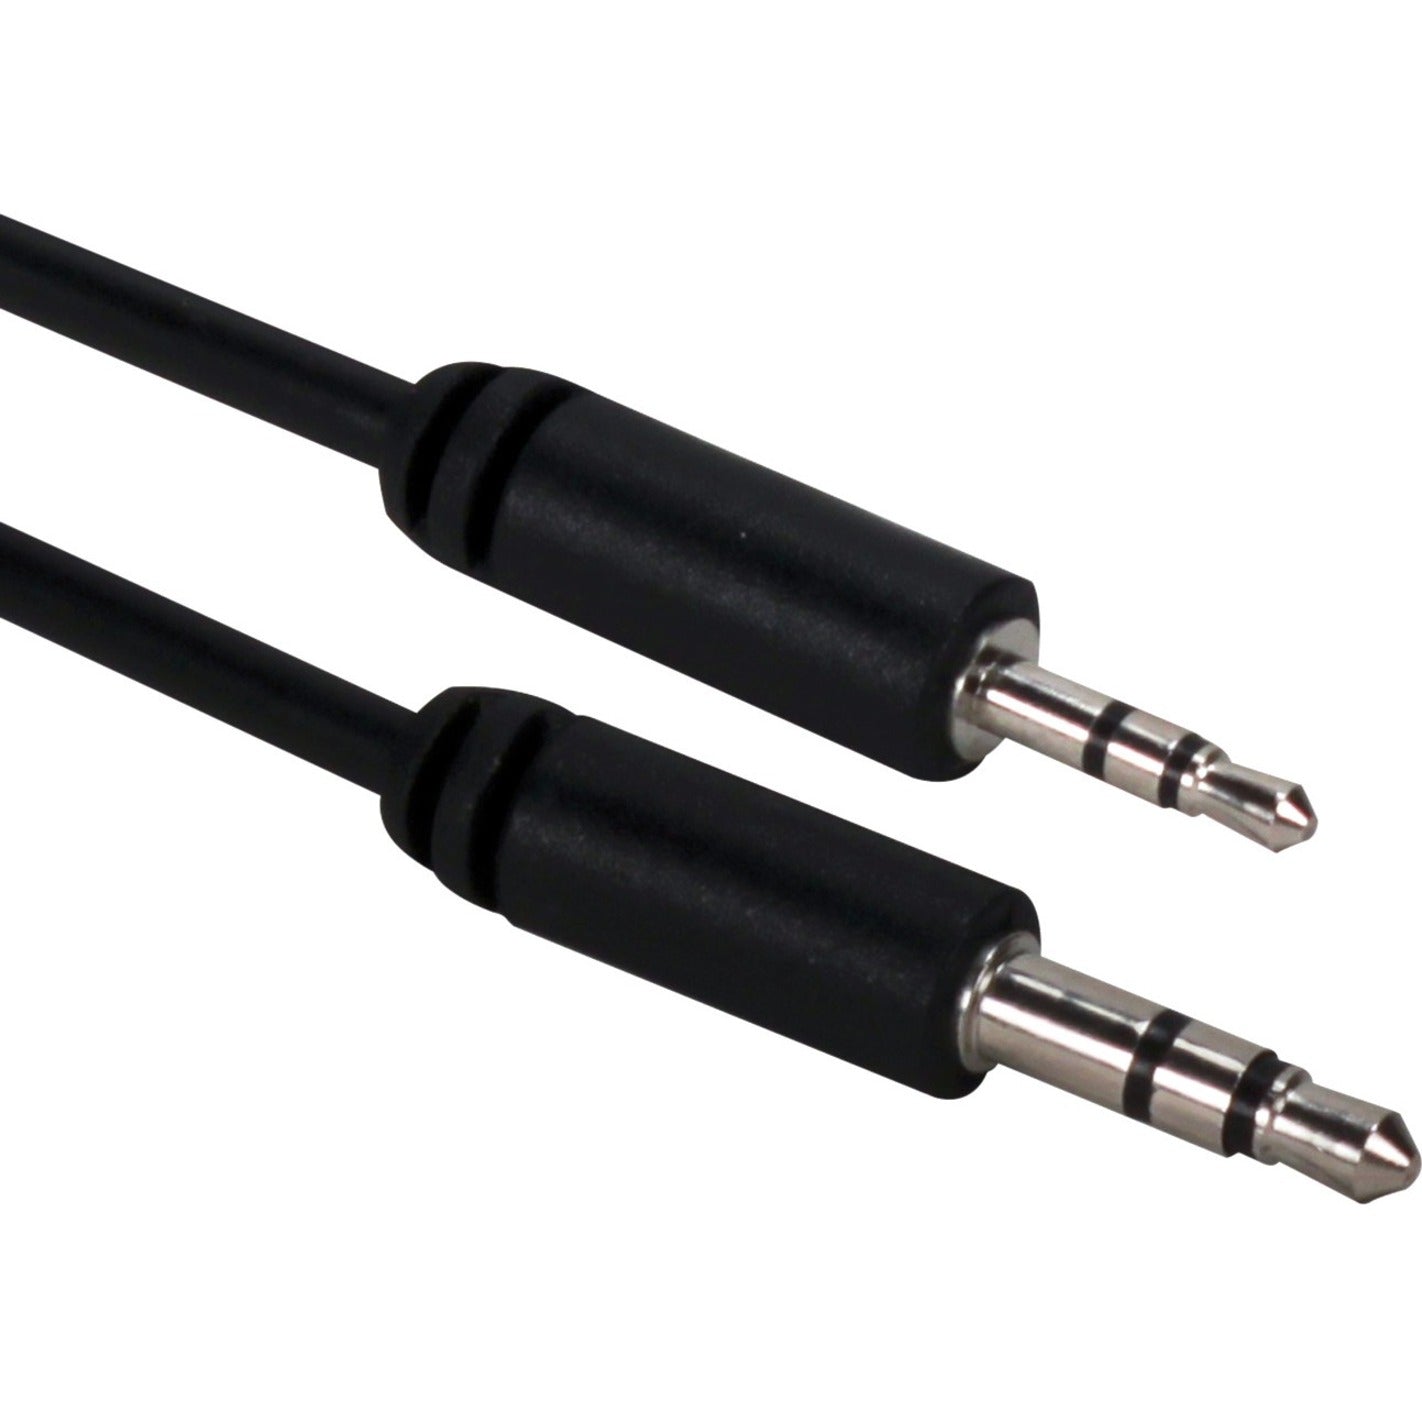 QVS CC399C-12 12ft 3.5mm Male to 2.5mm Male Headphone Audio Conversion Cable, Compatible with Bose QC35, JBL S700